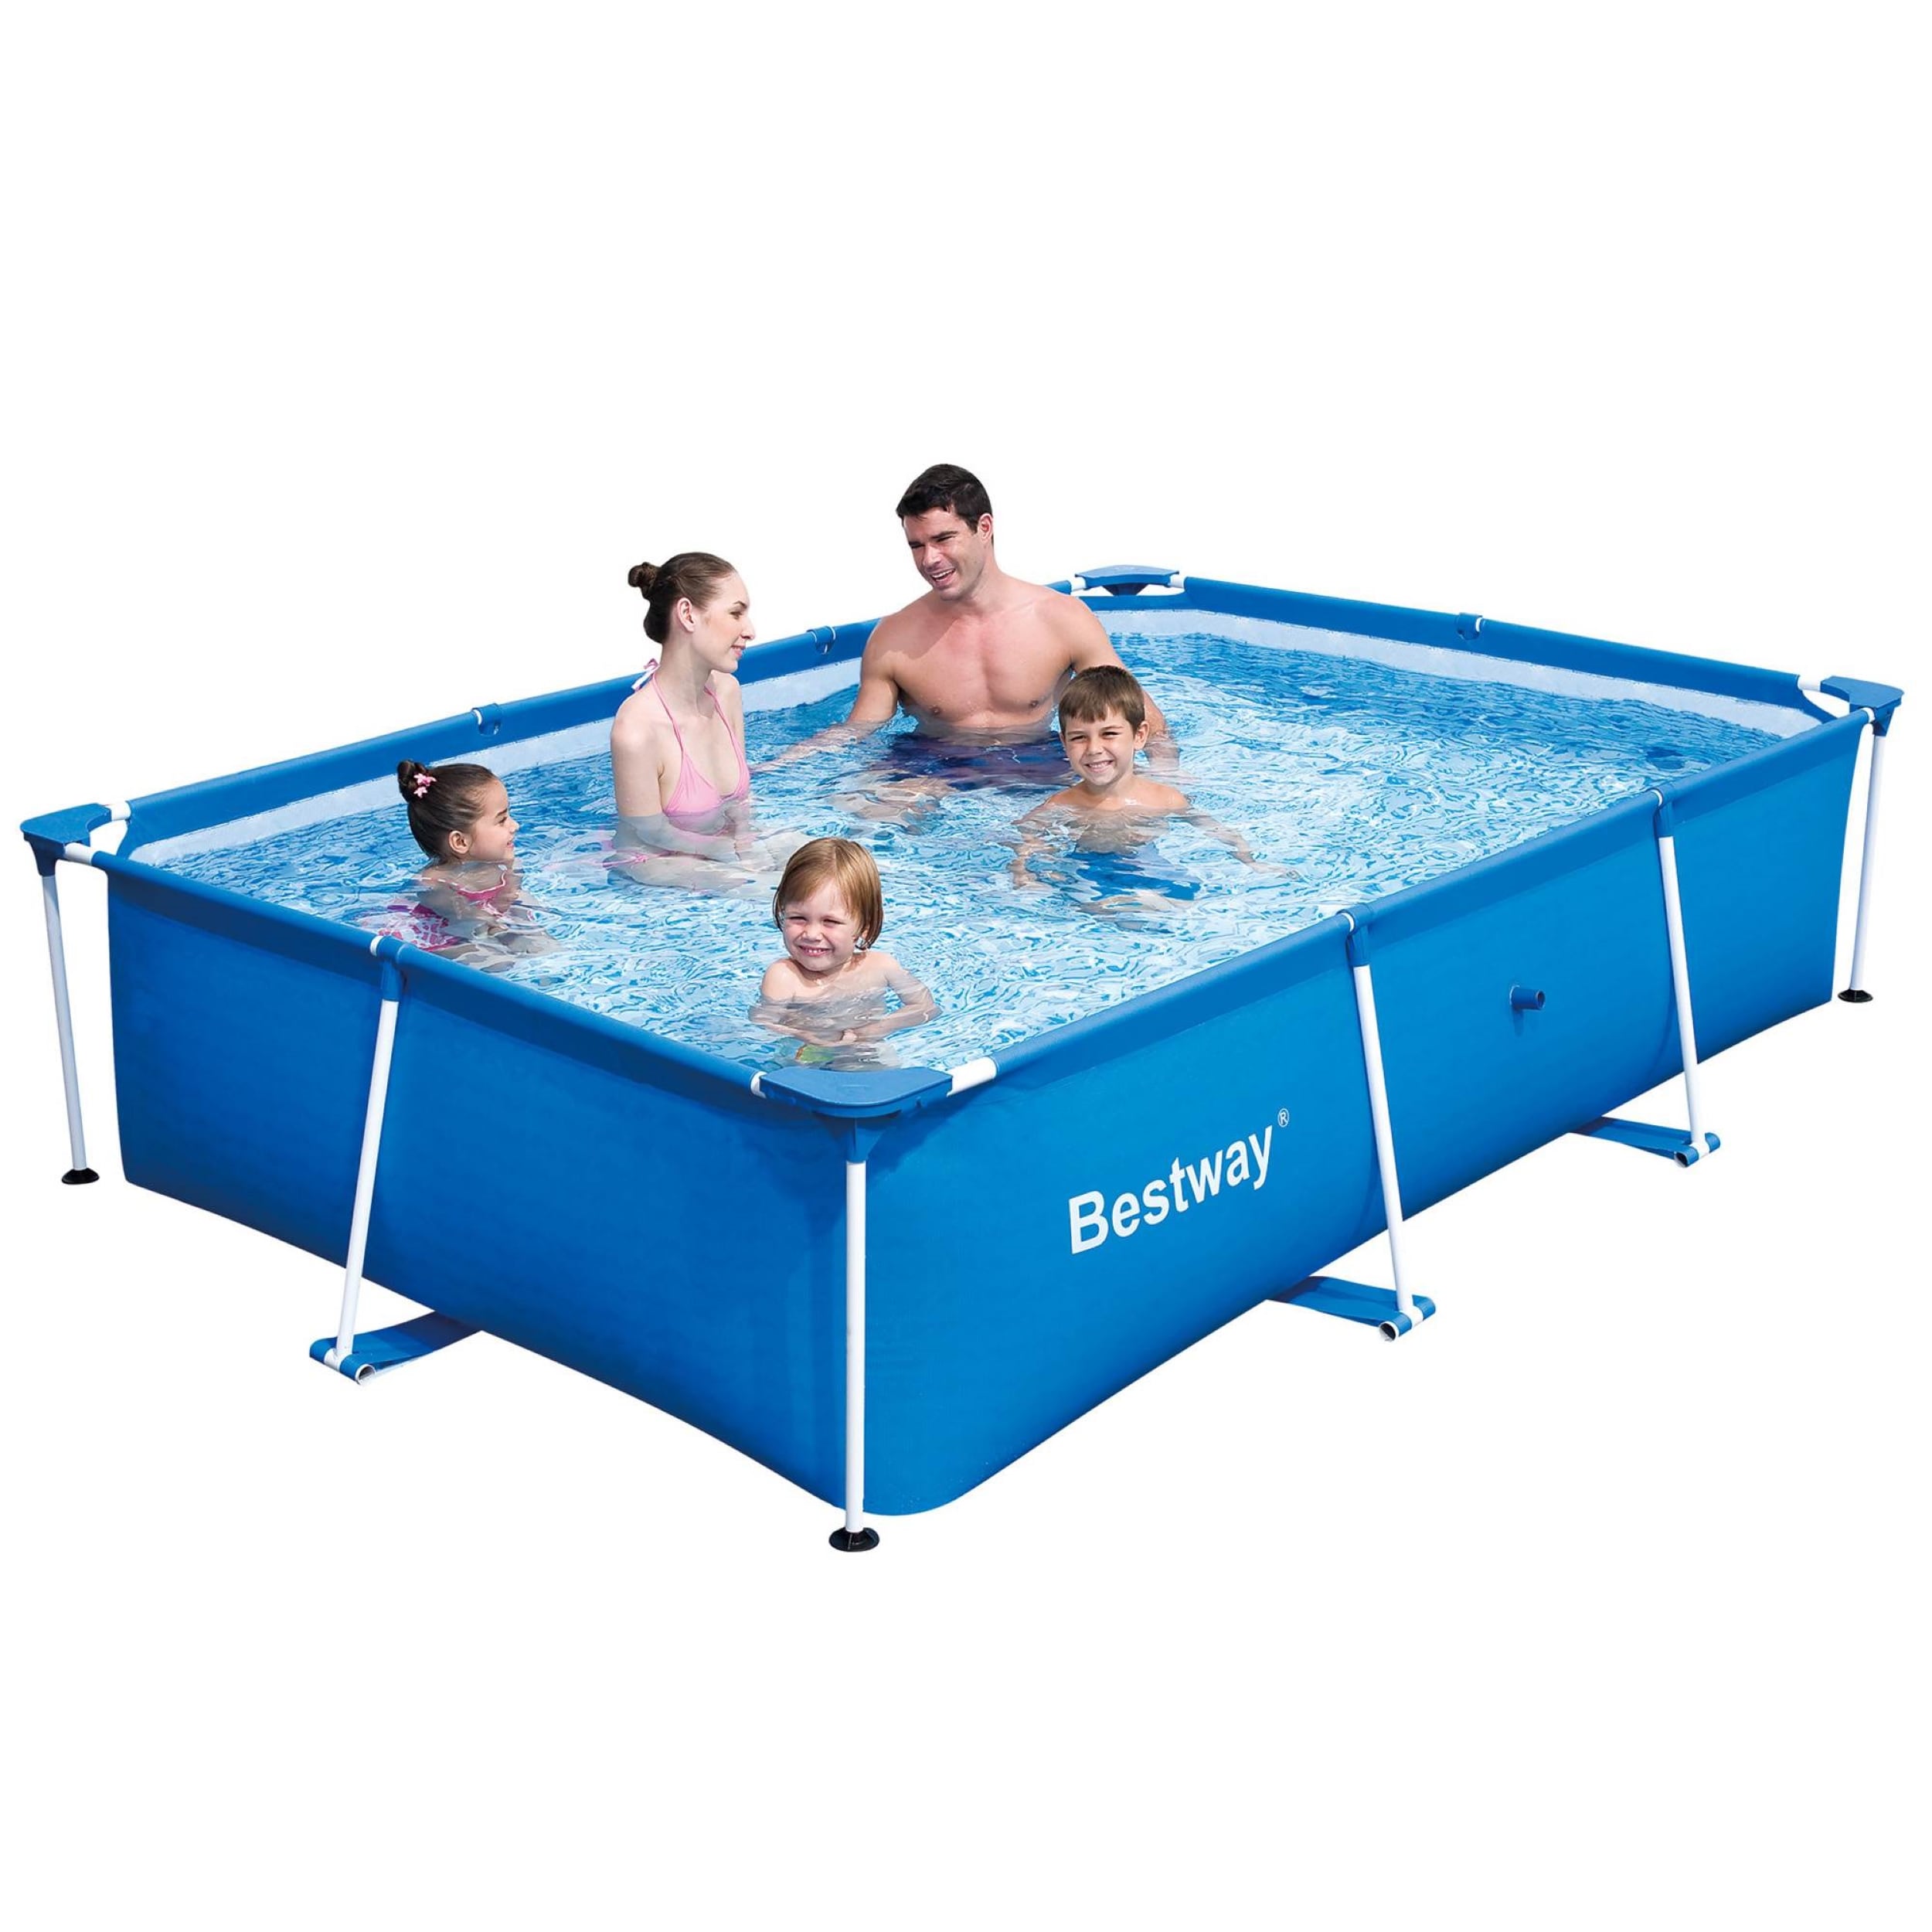 Bestway Above-Ground at Above-Ground 6.5-ft x Frame Splash department x 26-in Pools the Frame Metal in Rectangle Pool 10-ft